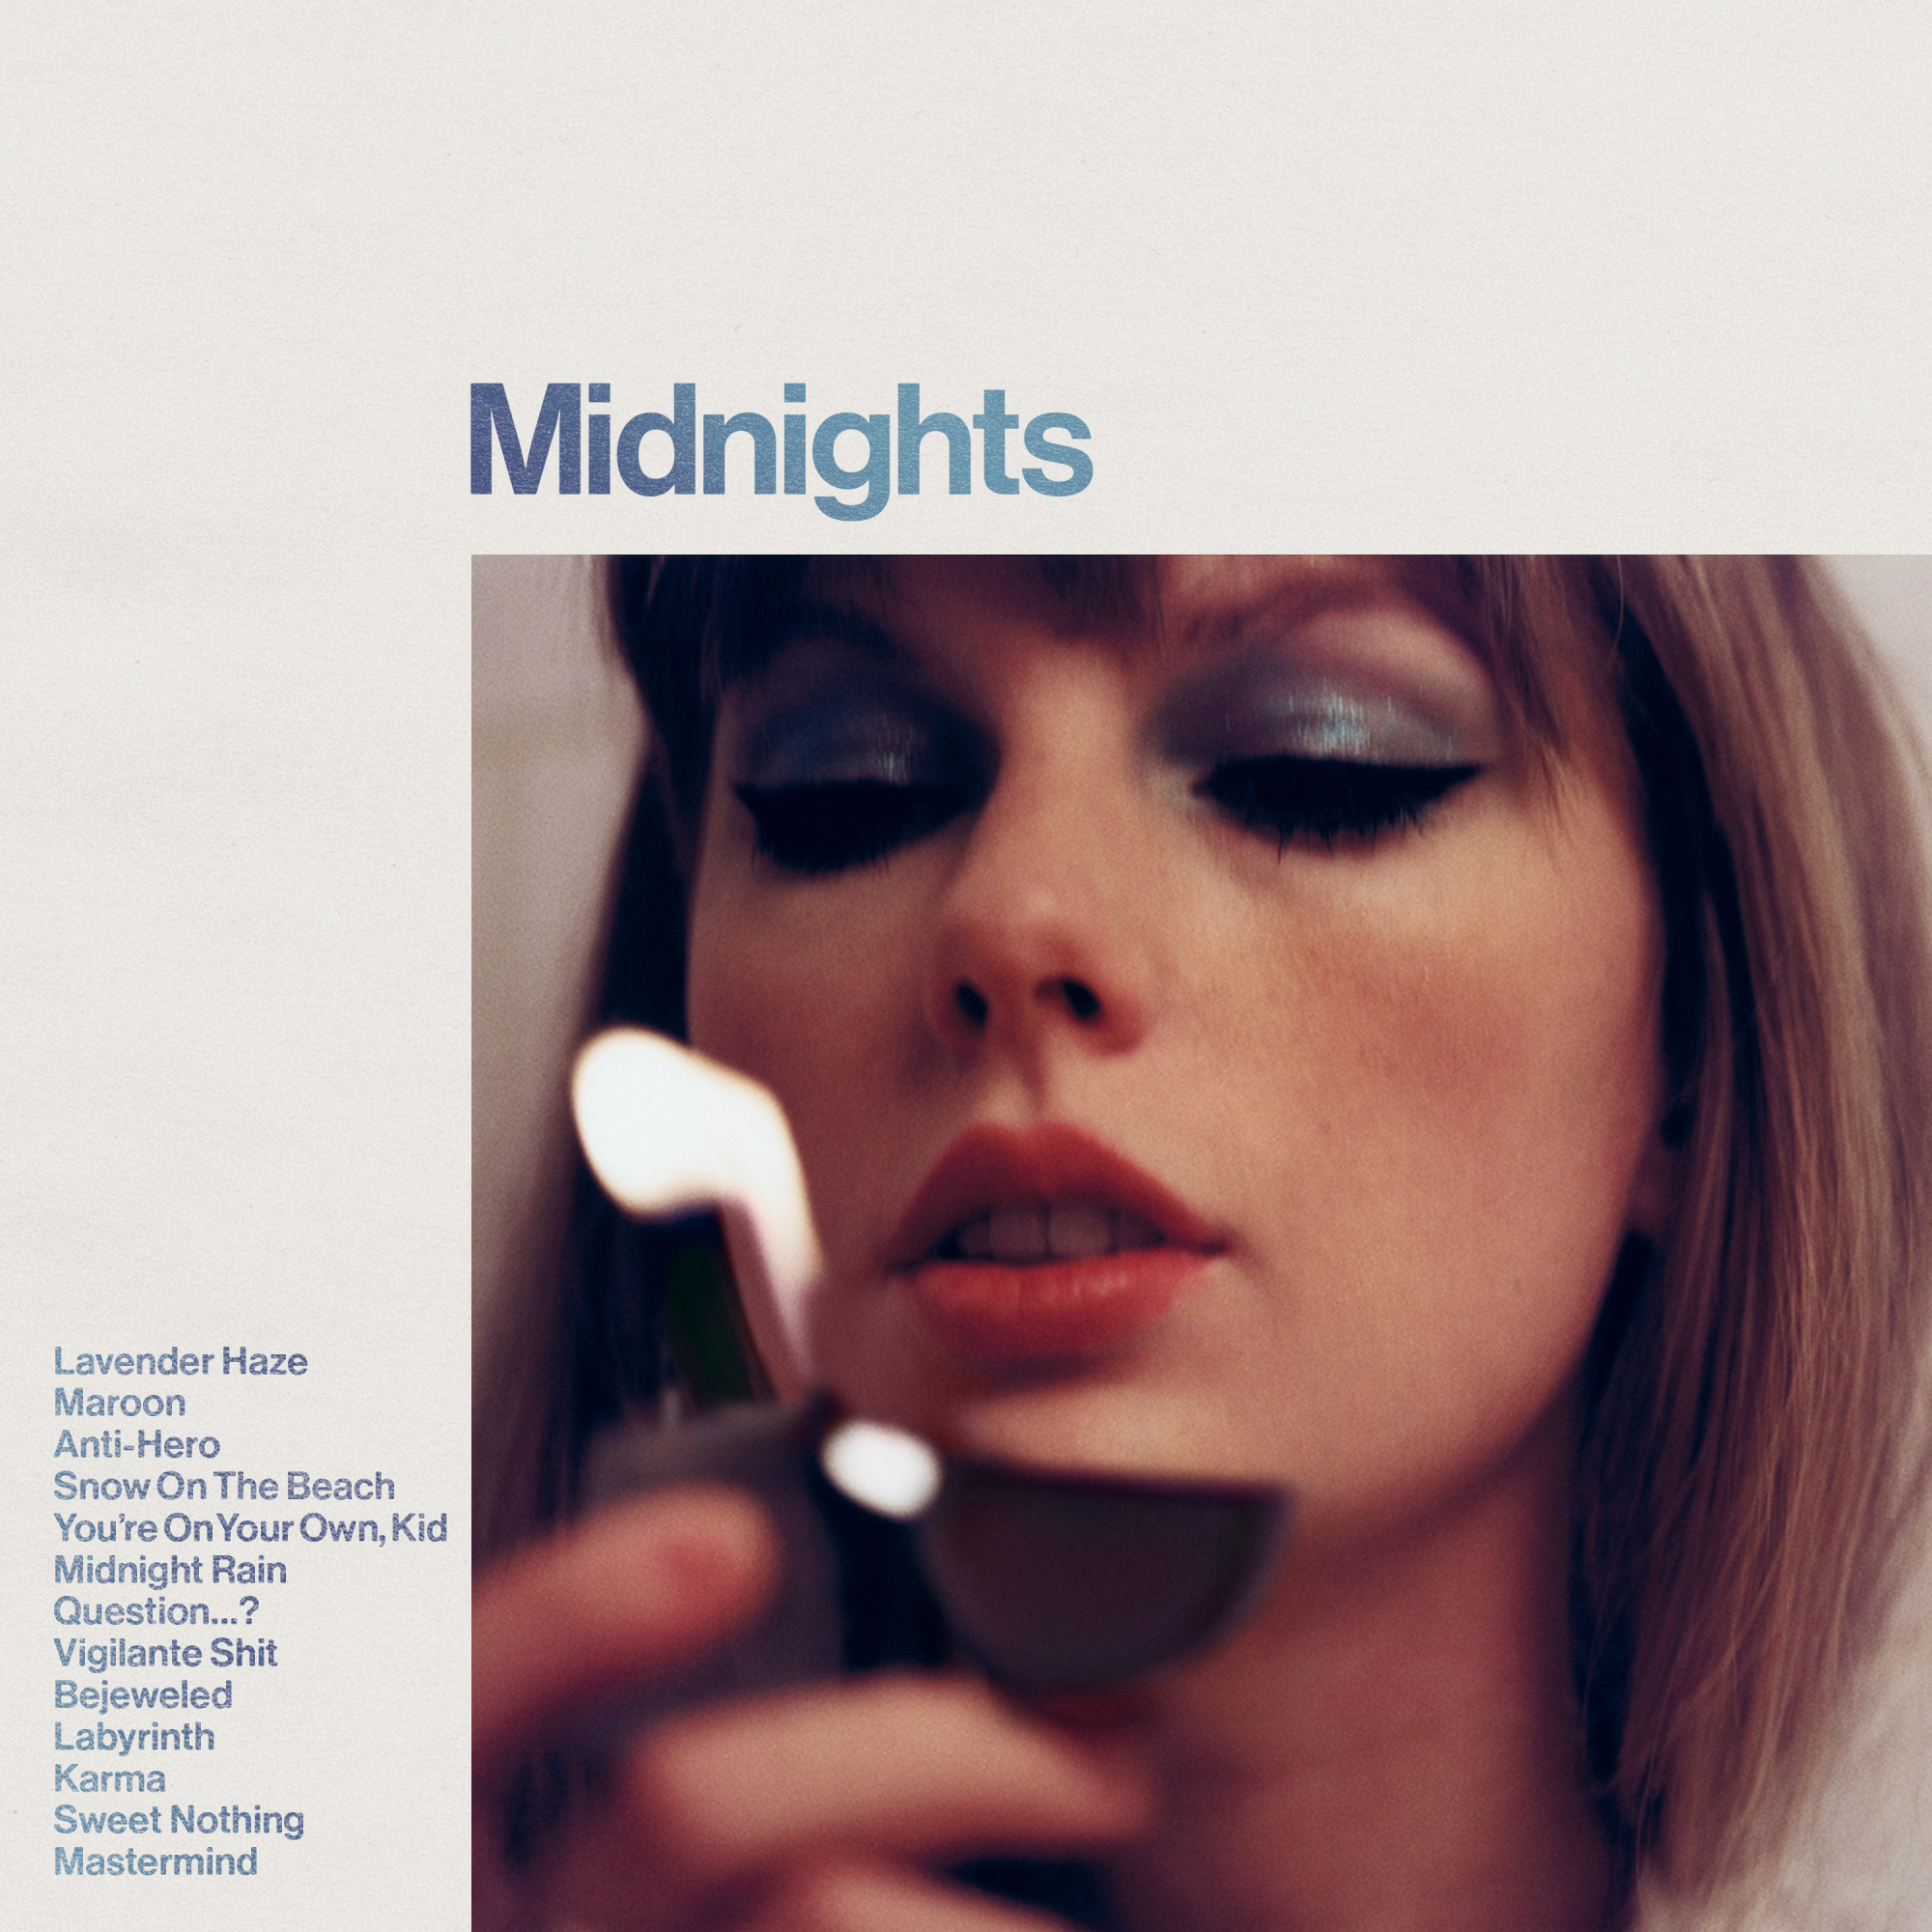 “Midnights” by Taylor Swift. Photo: Republic Records via AP